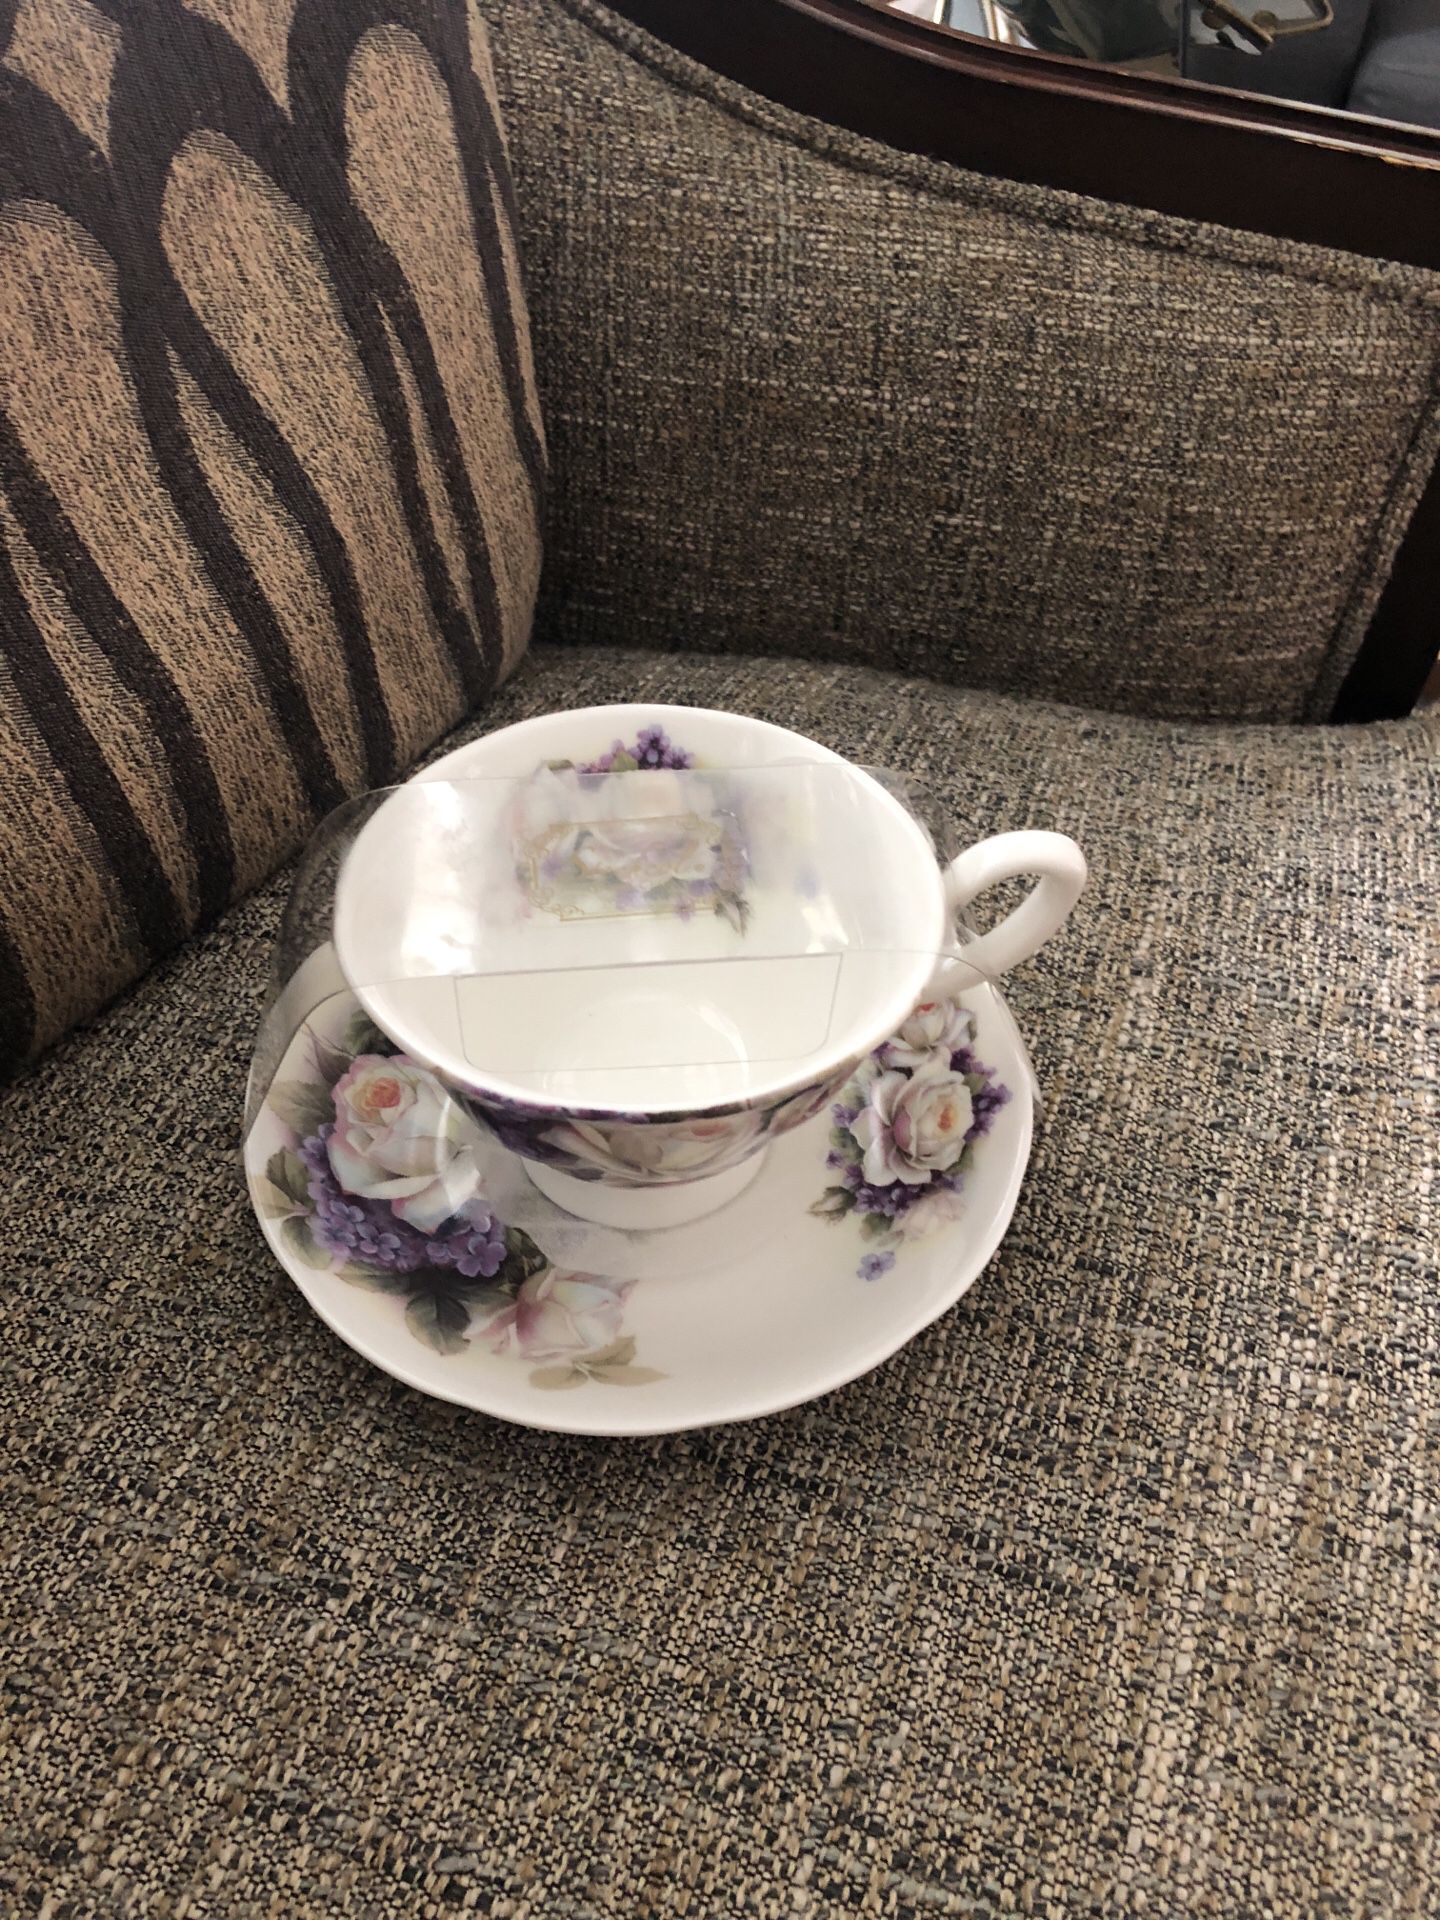 2 PCS Tea ☕️ Cup. Please see all the pictures and read the description